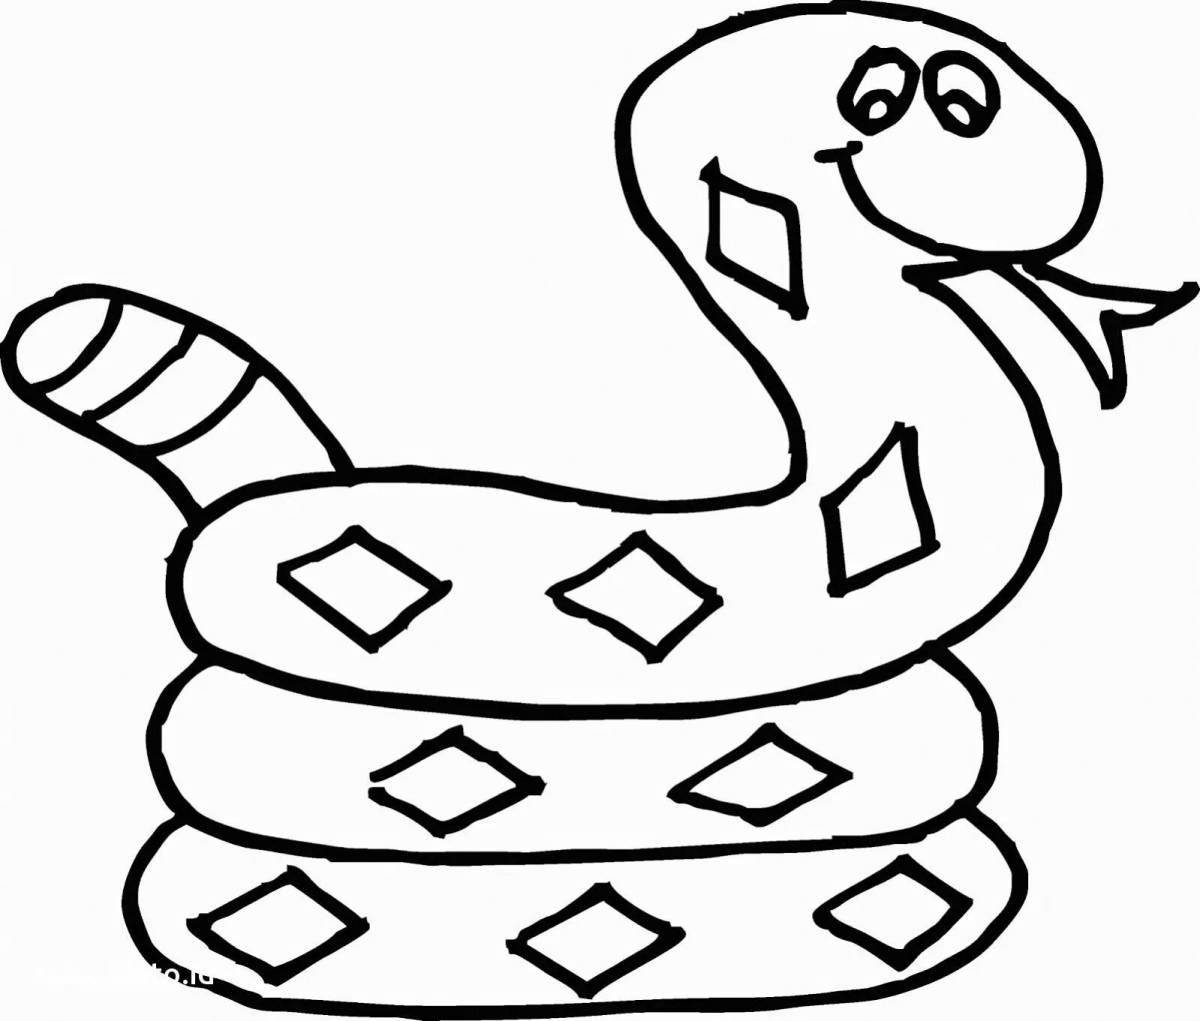 Creative snake coloring book for 5-6 year olds